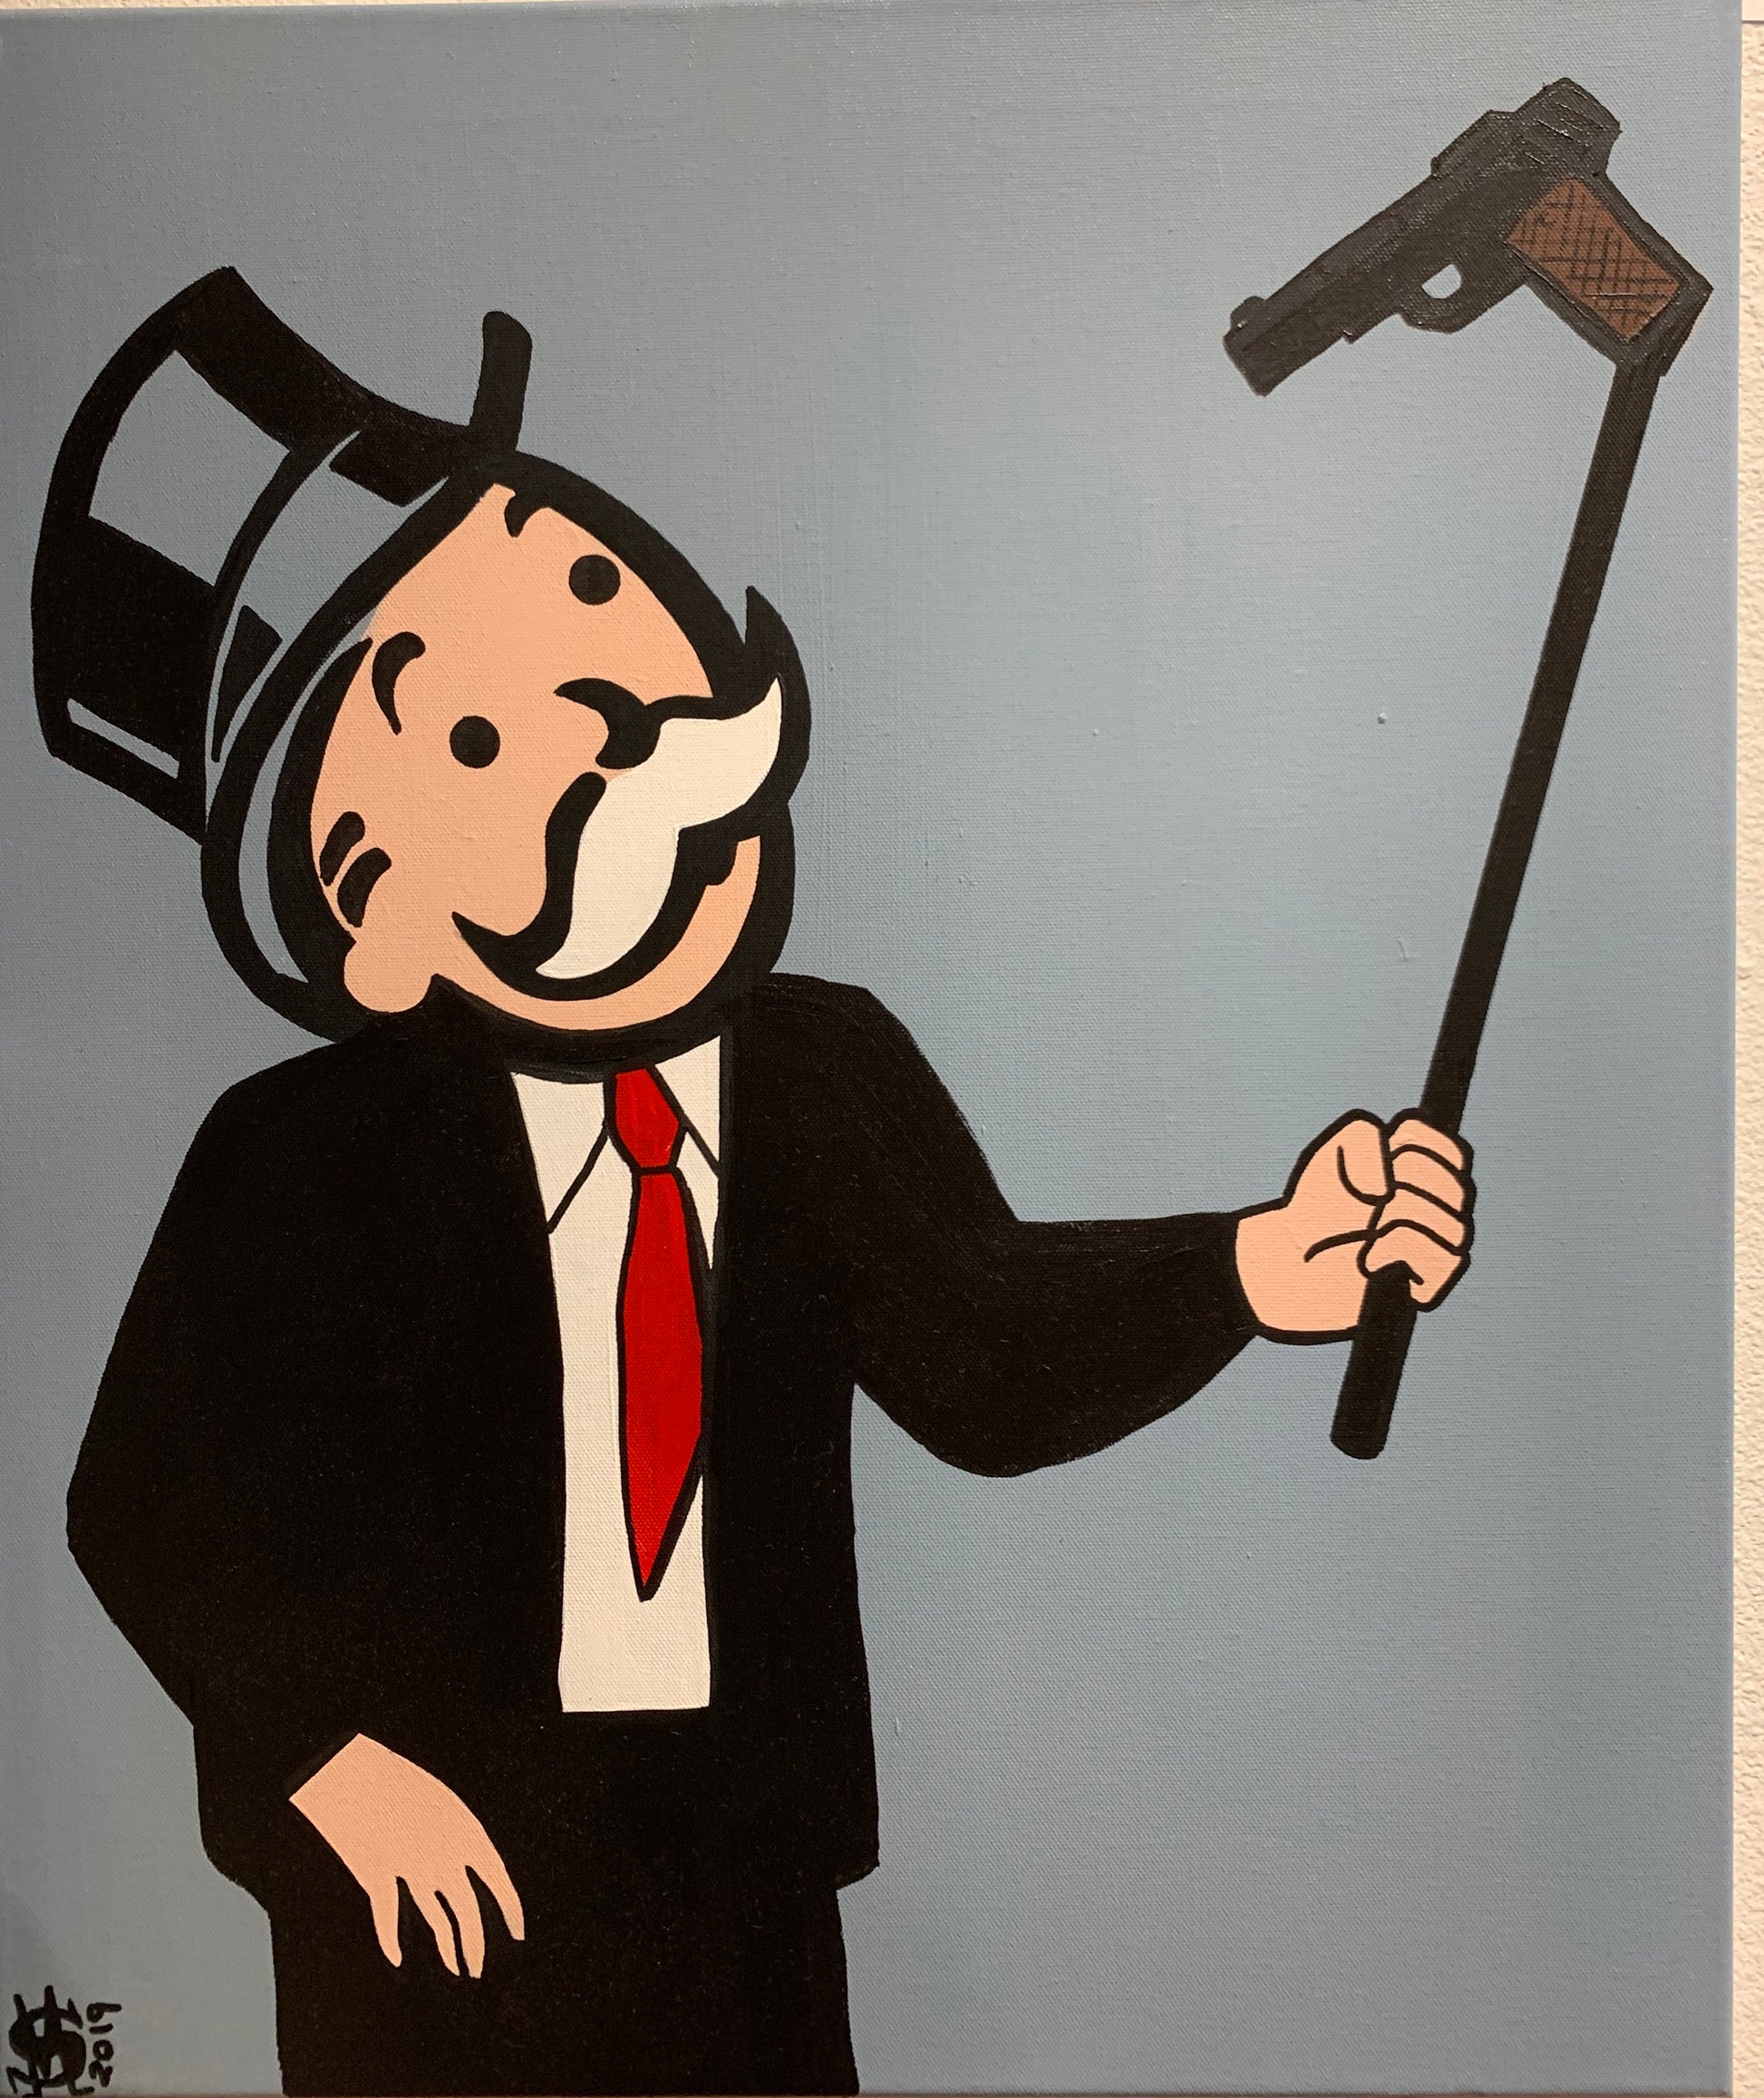 Sinister Monopoly “Monopoly Selfie” 